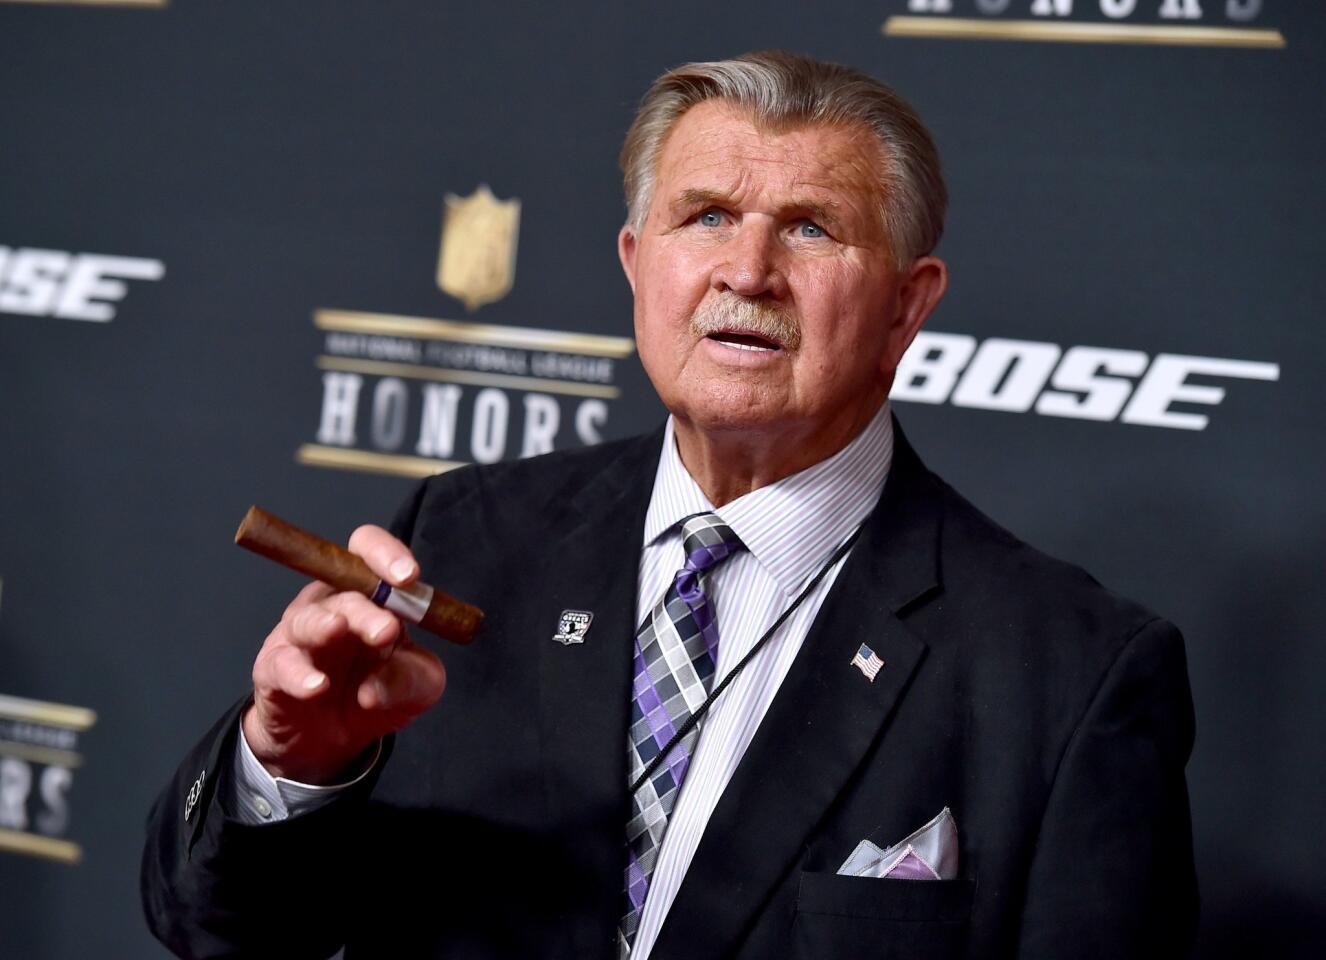 Mike Ditka arrives at the fifth annual NFL Honors at the Bill Graham Civic Auditorium on Feb. 6, 2016, in San Francisco.